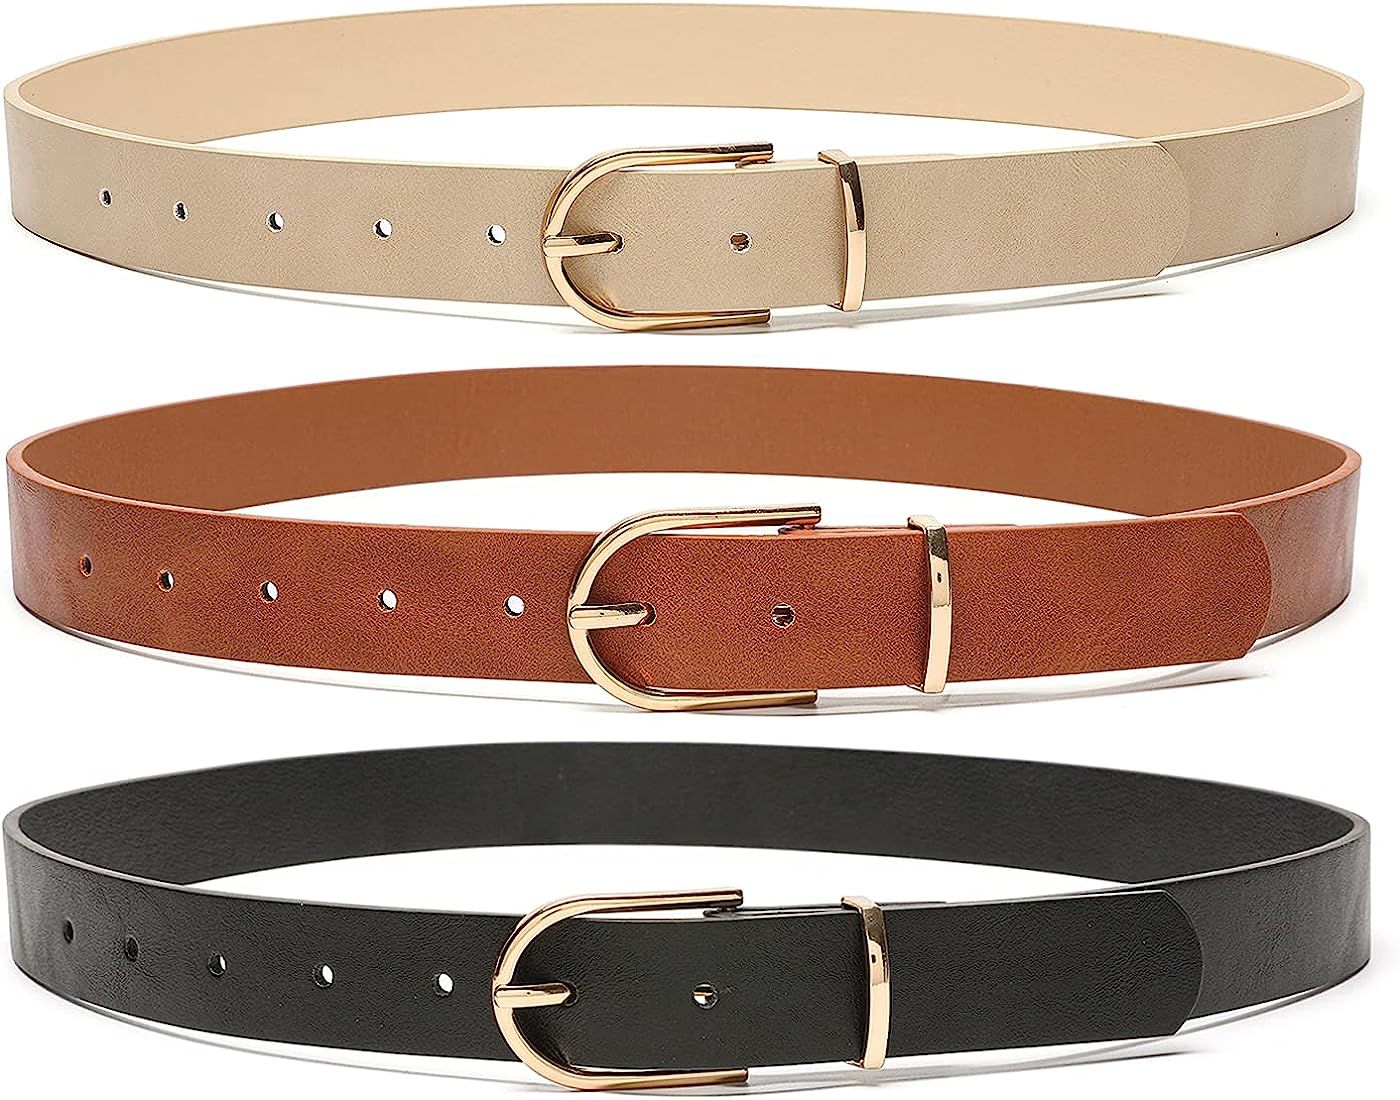 3 Pack Women's Faux Leather Waist Belt for Jeans Dress Black White Brown | Amazon (US)